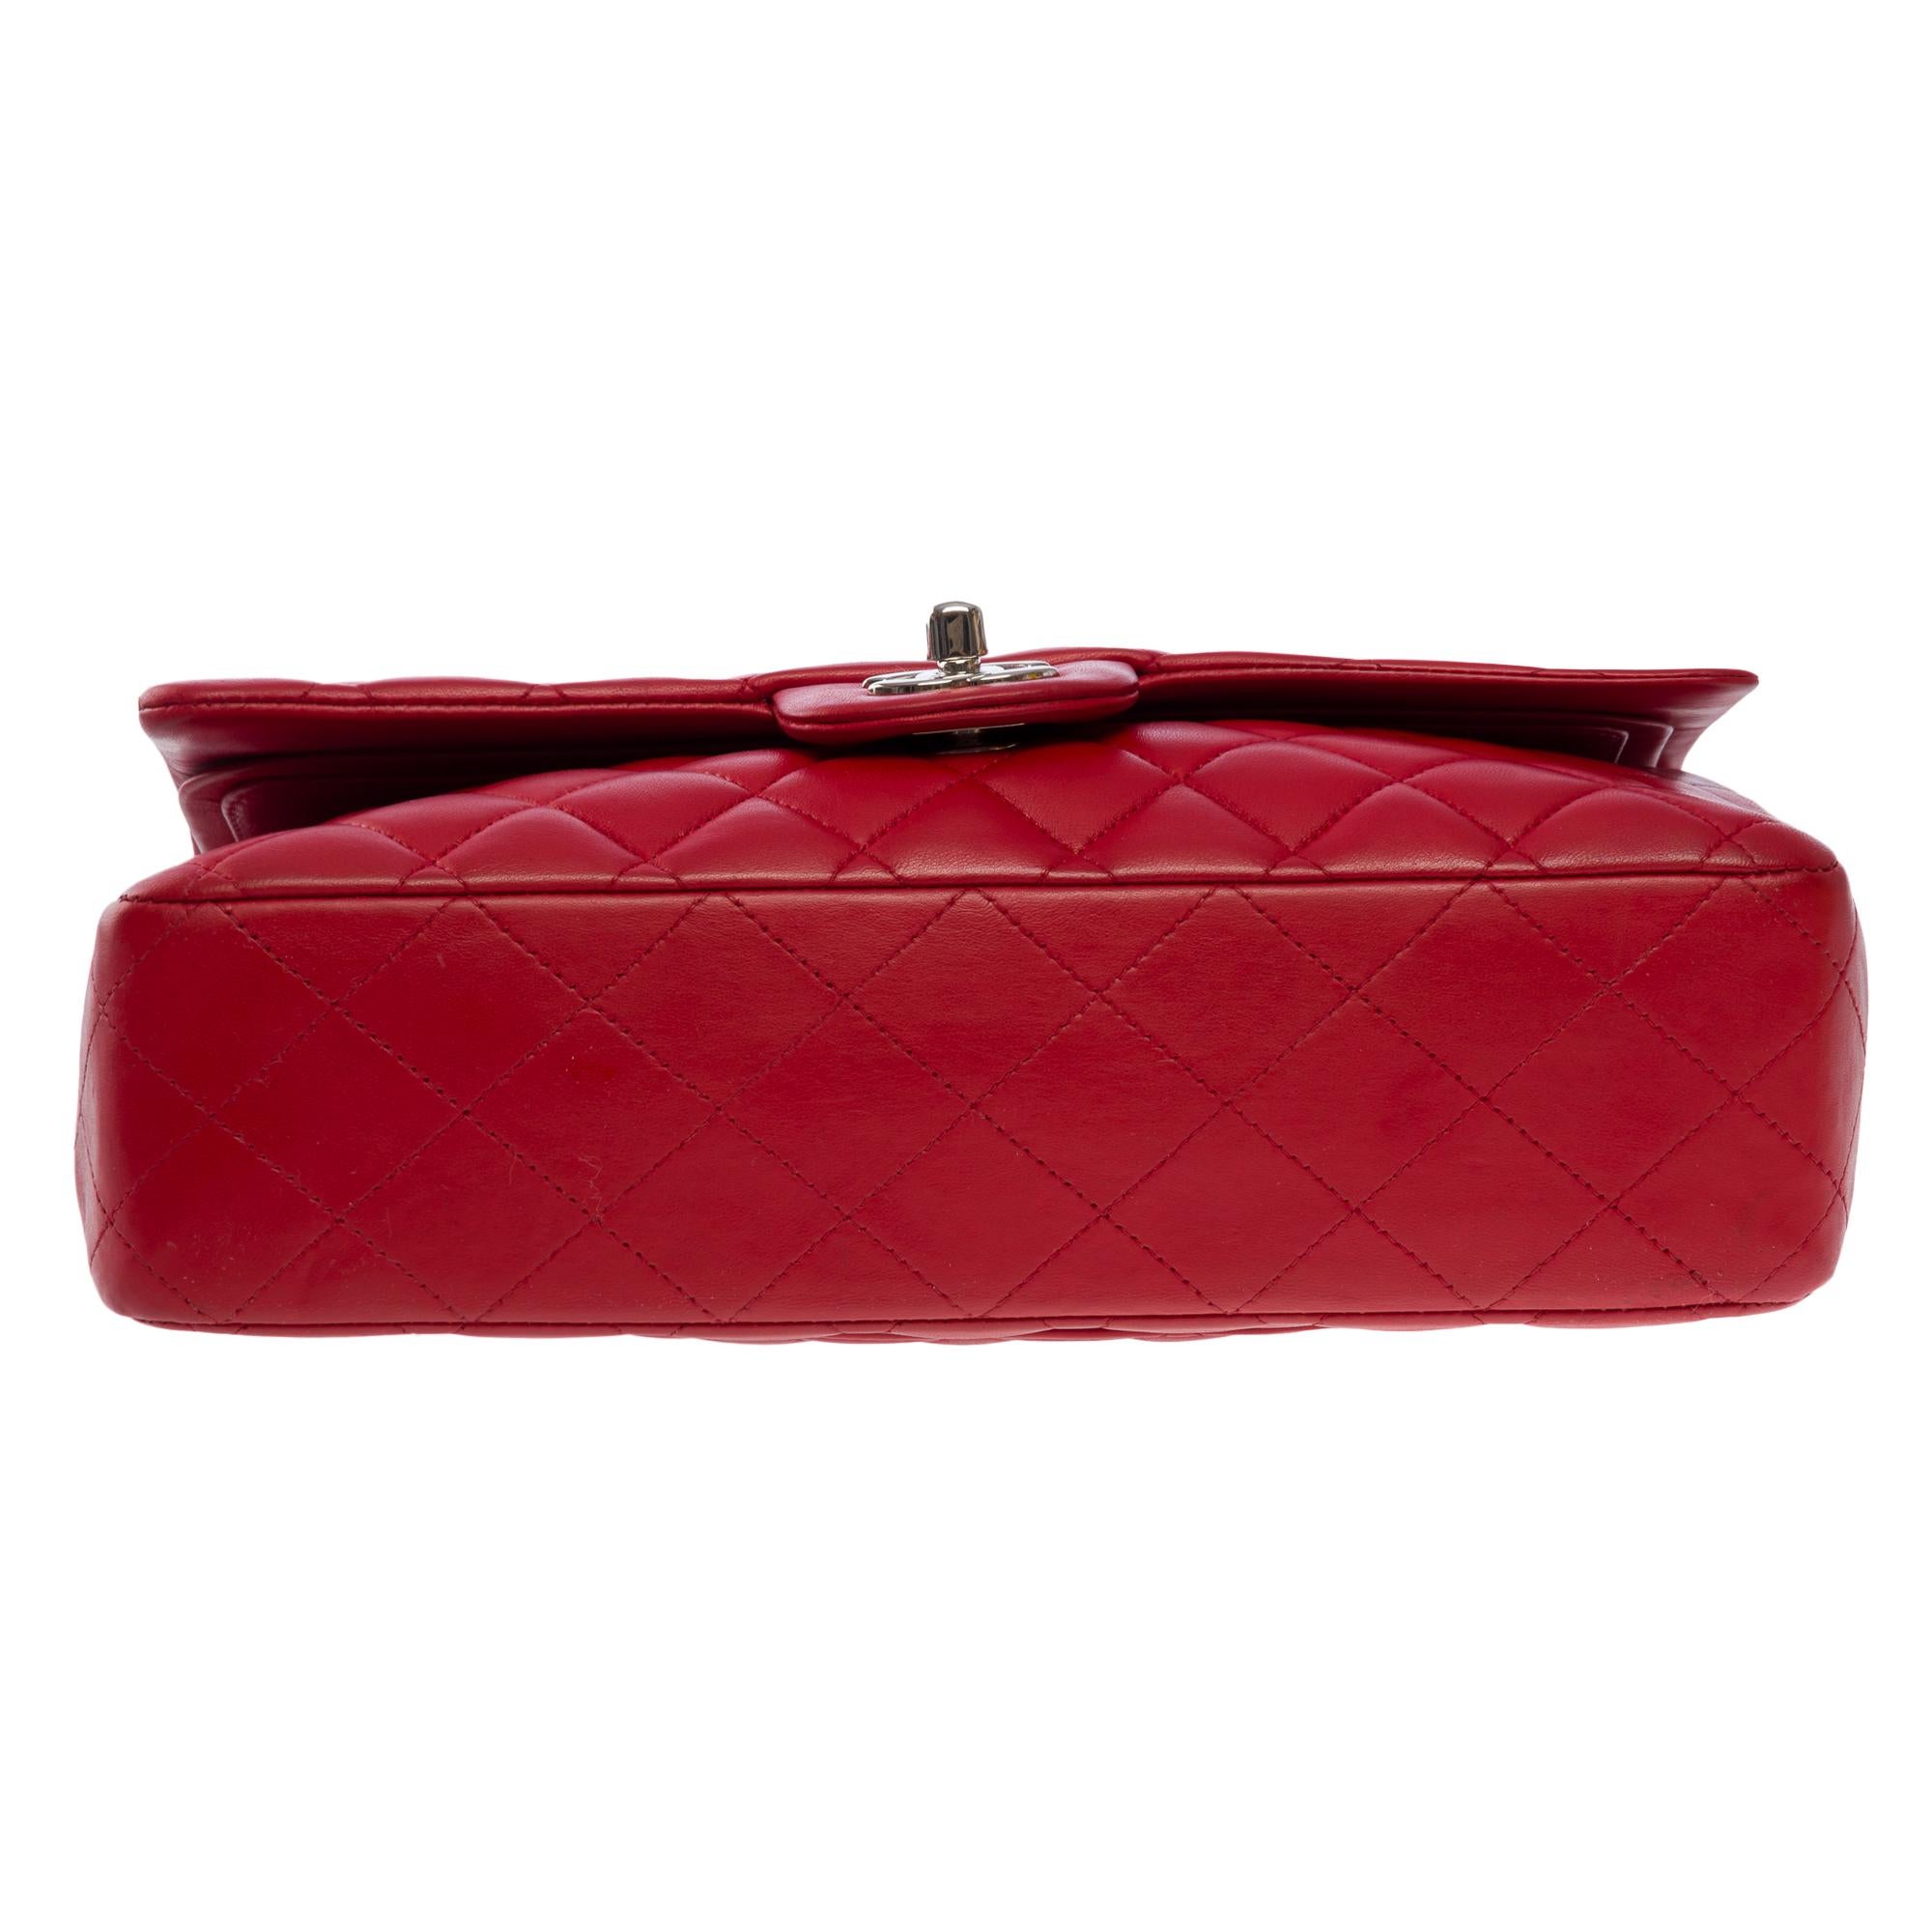 Chanel Timeless Medium double flap shoulder bag in Red lambskin leather, SHW For Sale 8